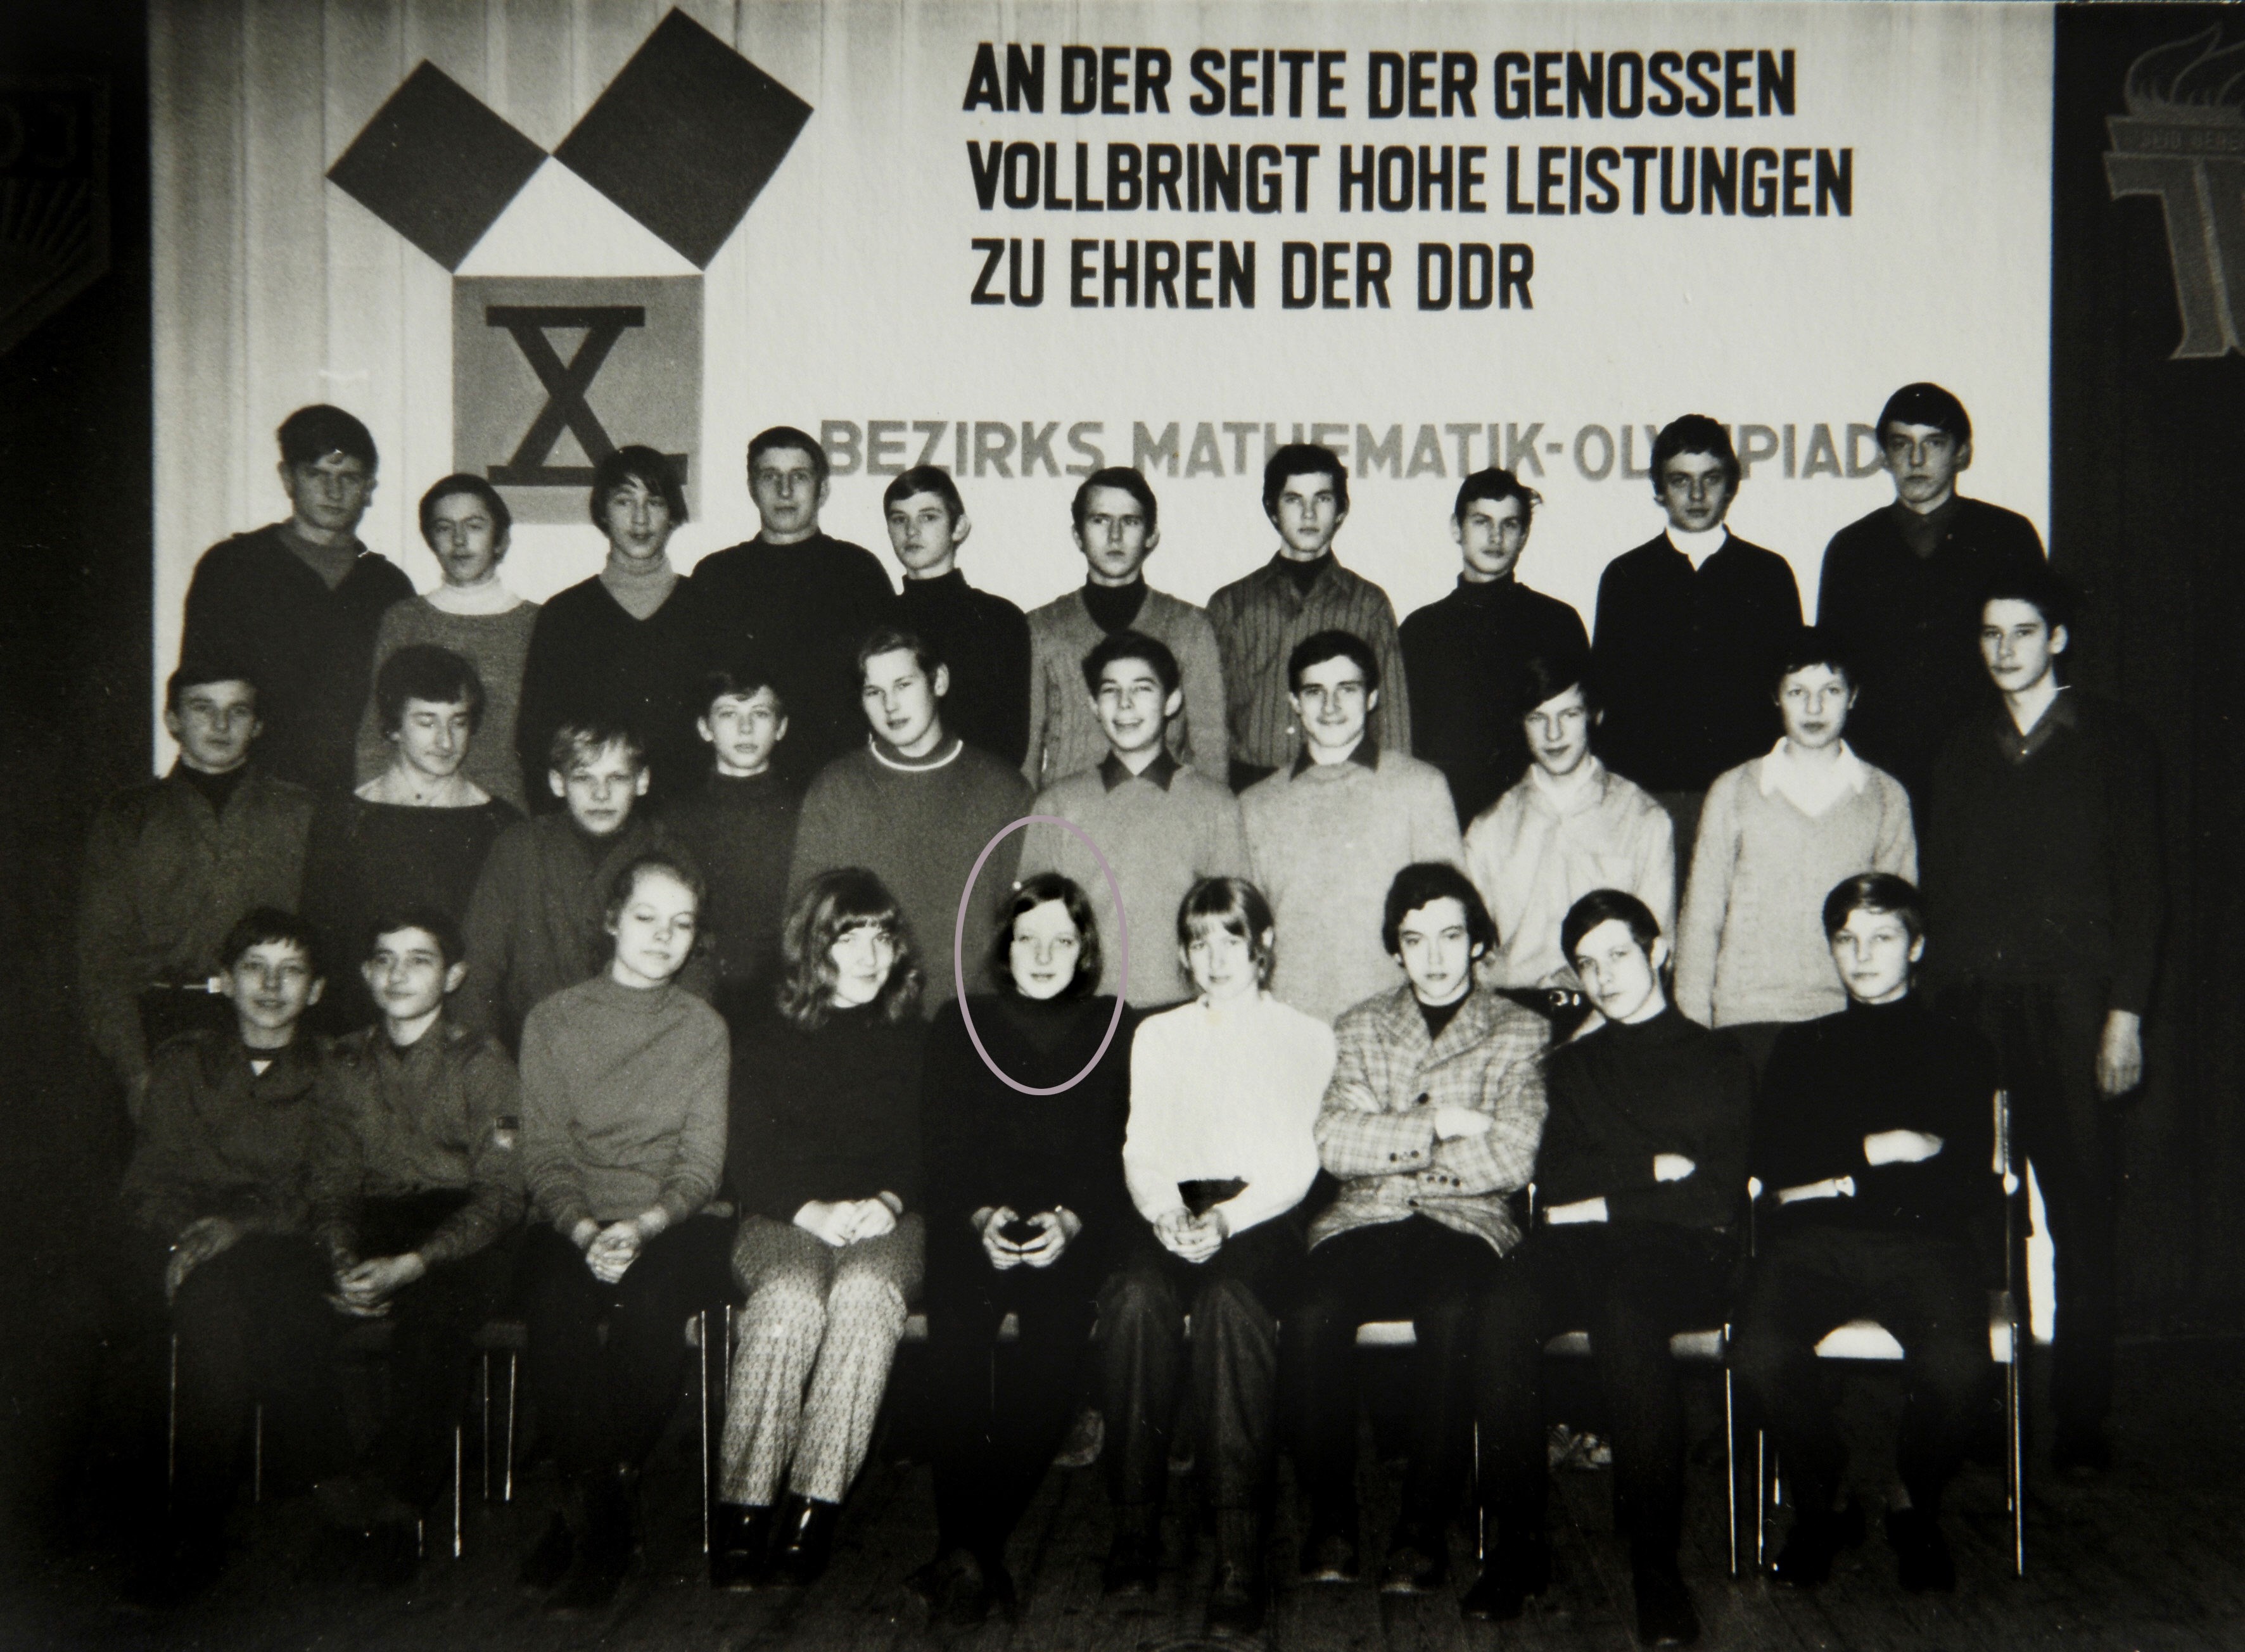 Angela Kasner posing for a group photo during the Mathematics Olympiad in Teterow, Germany, in 1971.